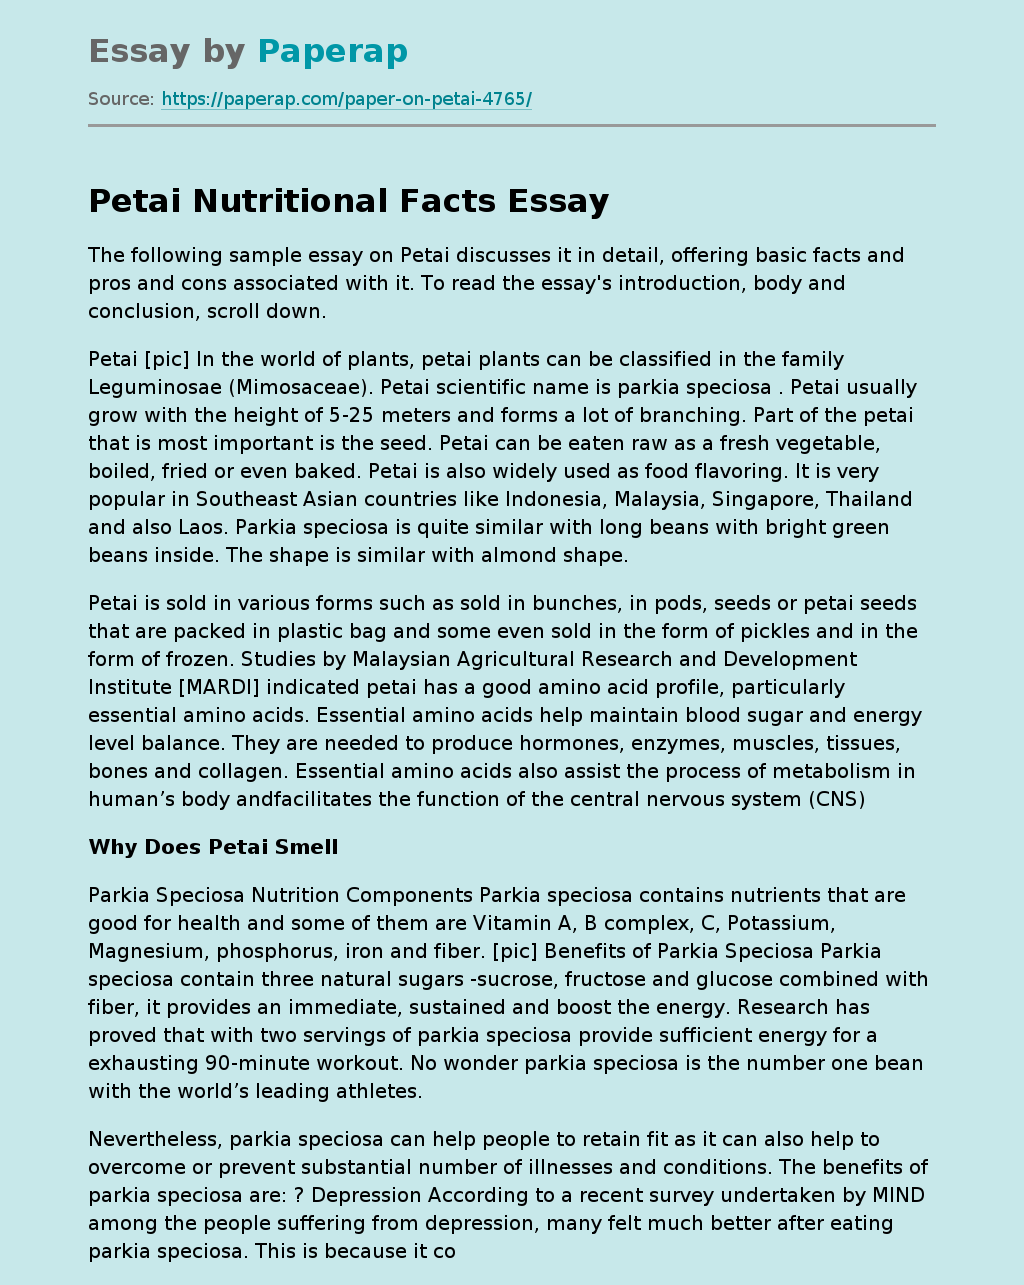 Petai Nutritional Facts